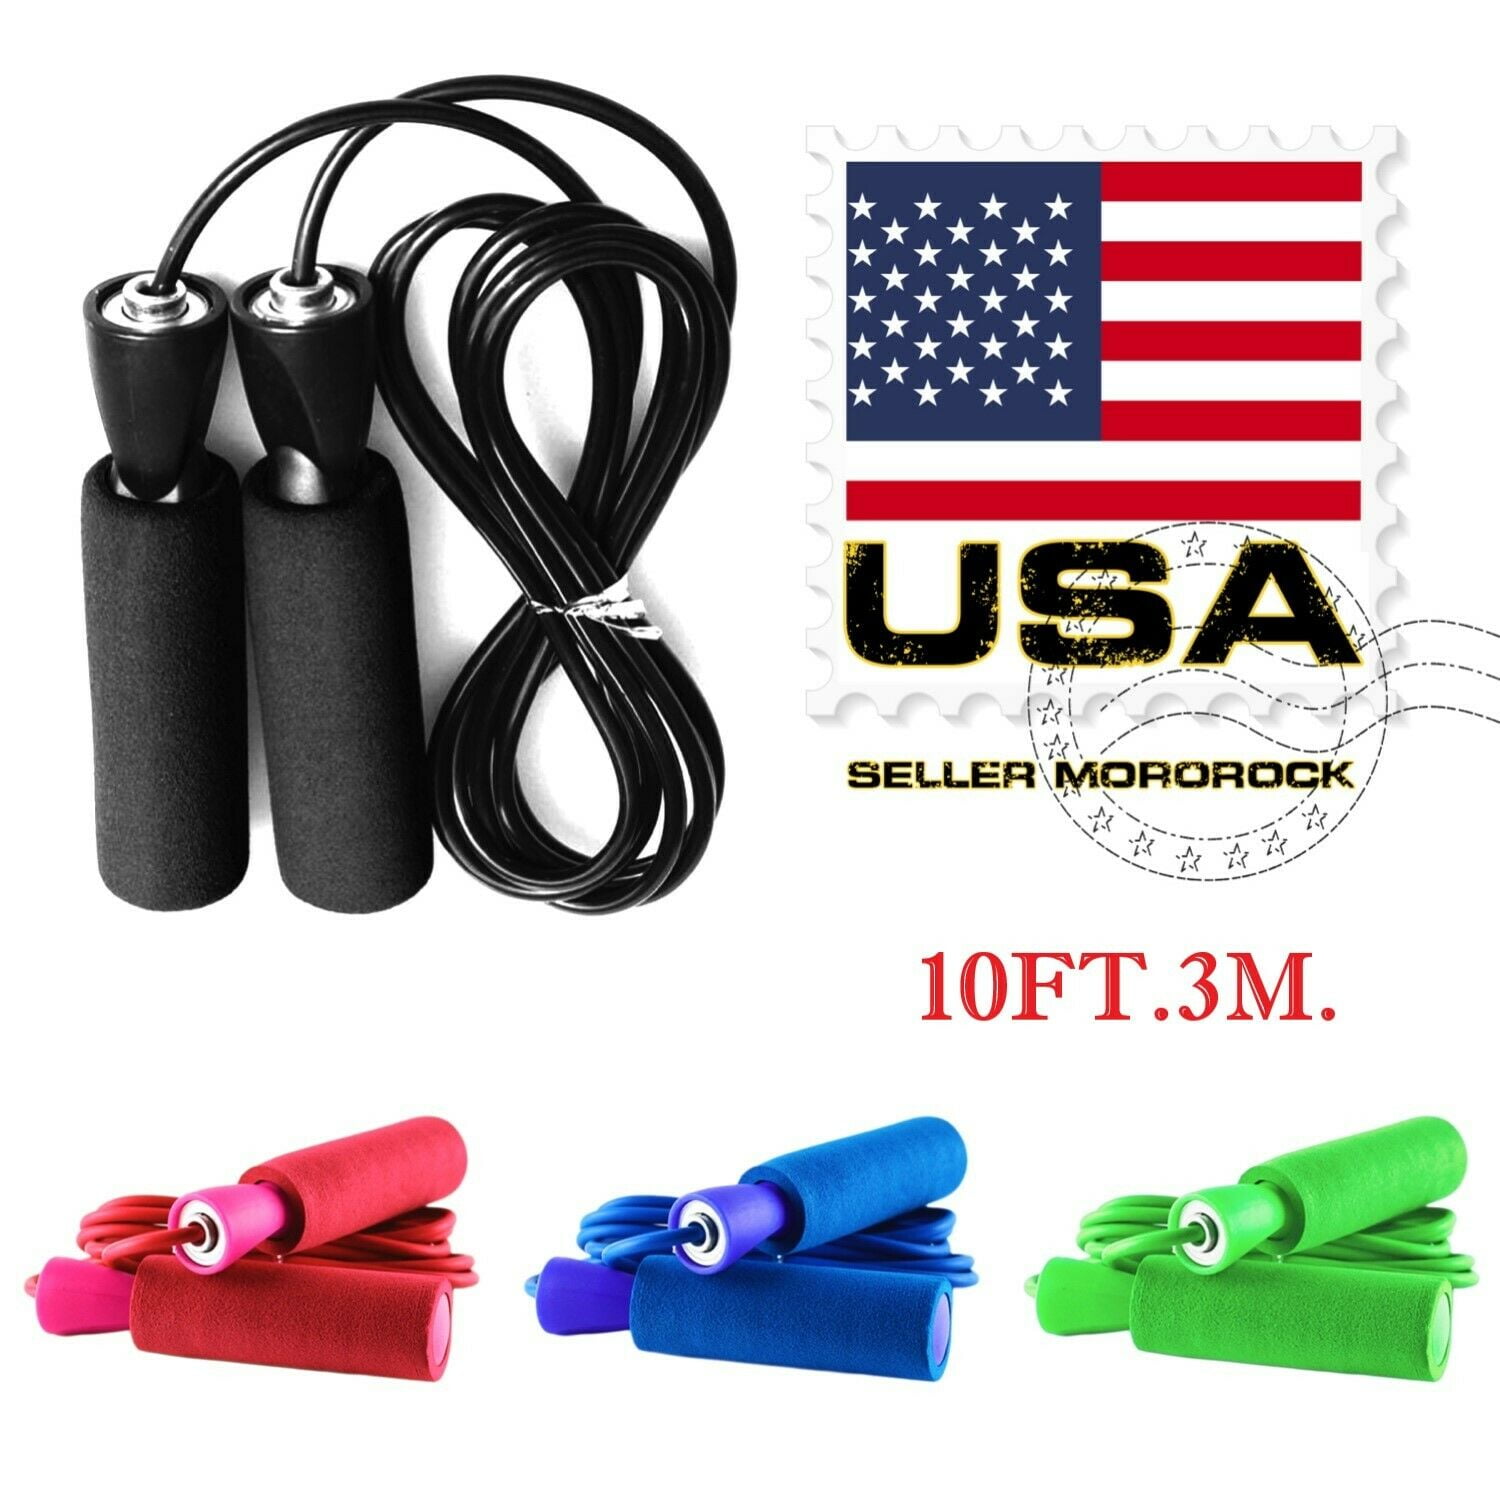 Details about   Jump Rope Speed Skipping Workout Weighted Gym Aerobic Exercise Boxi 